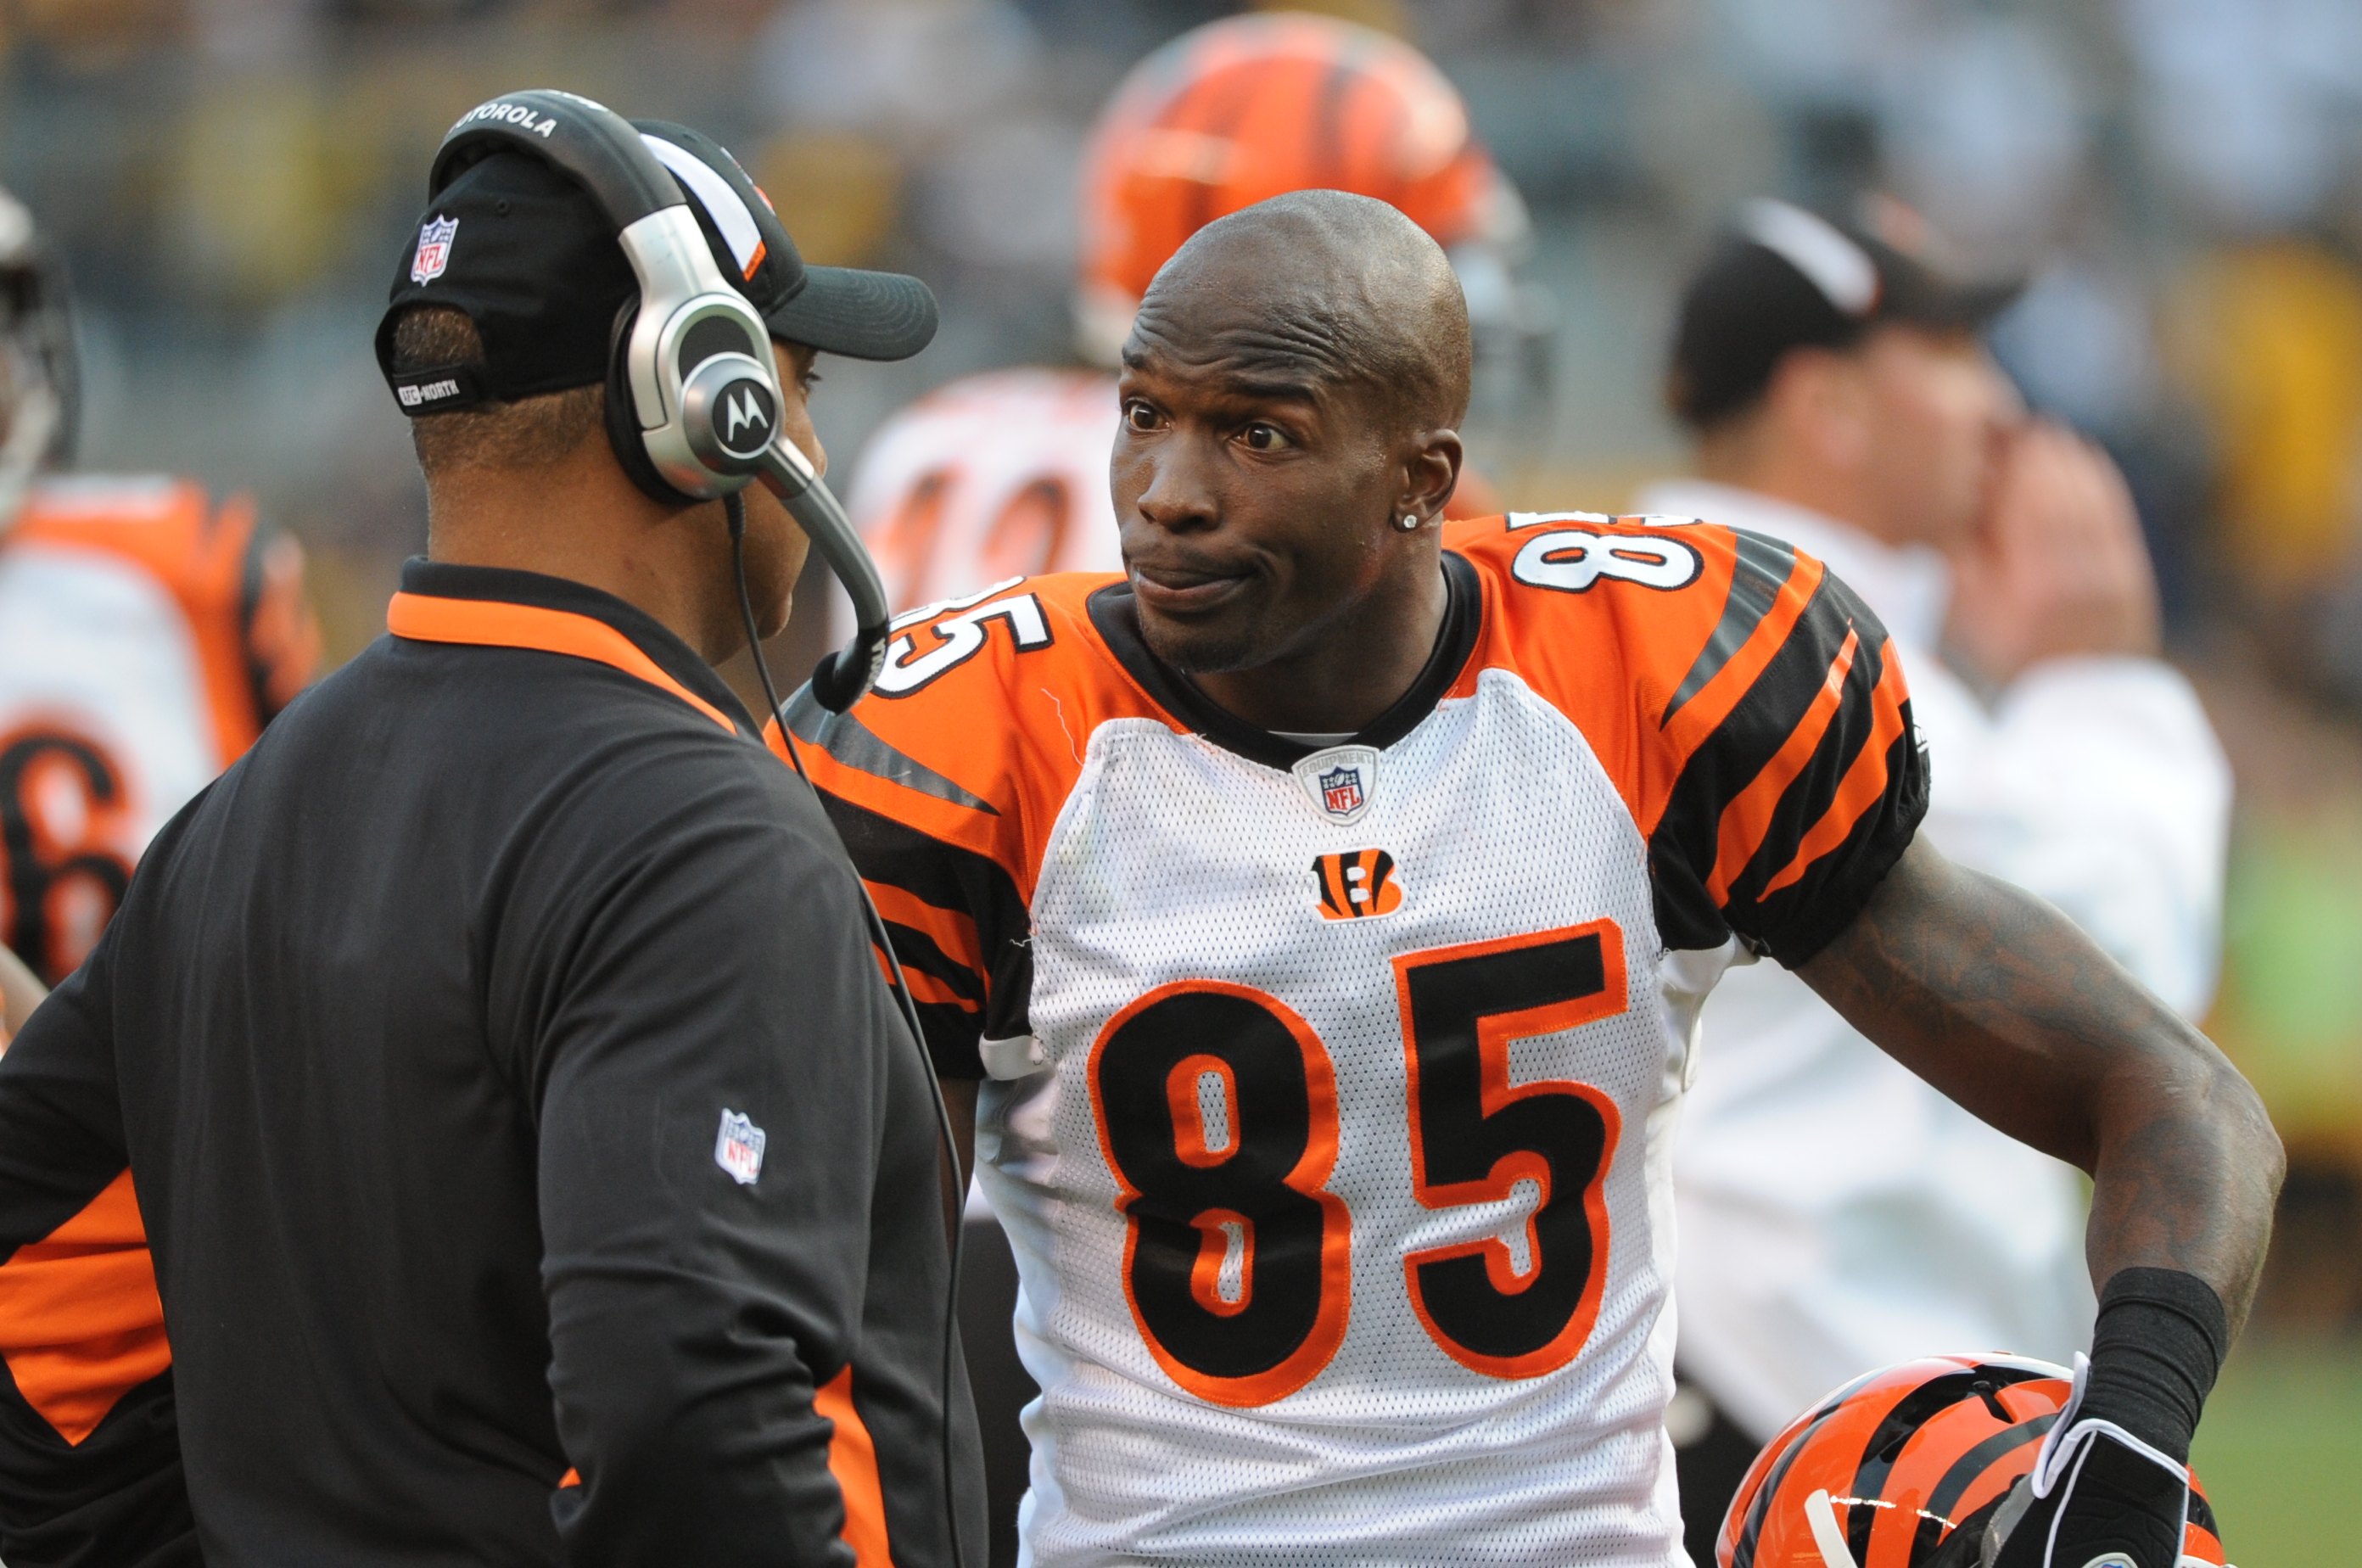 Chad johnson is the miami dolphins' new wideout, and it seems his week...